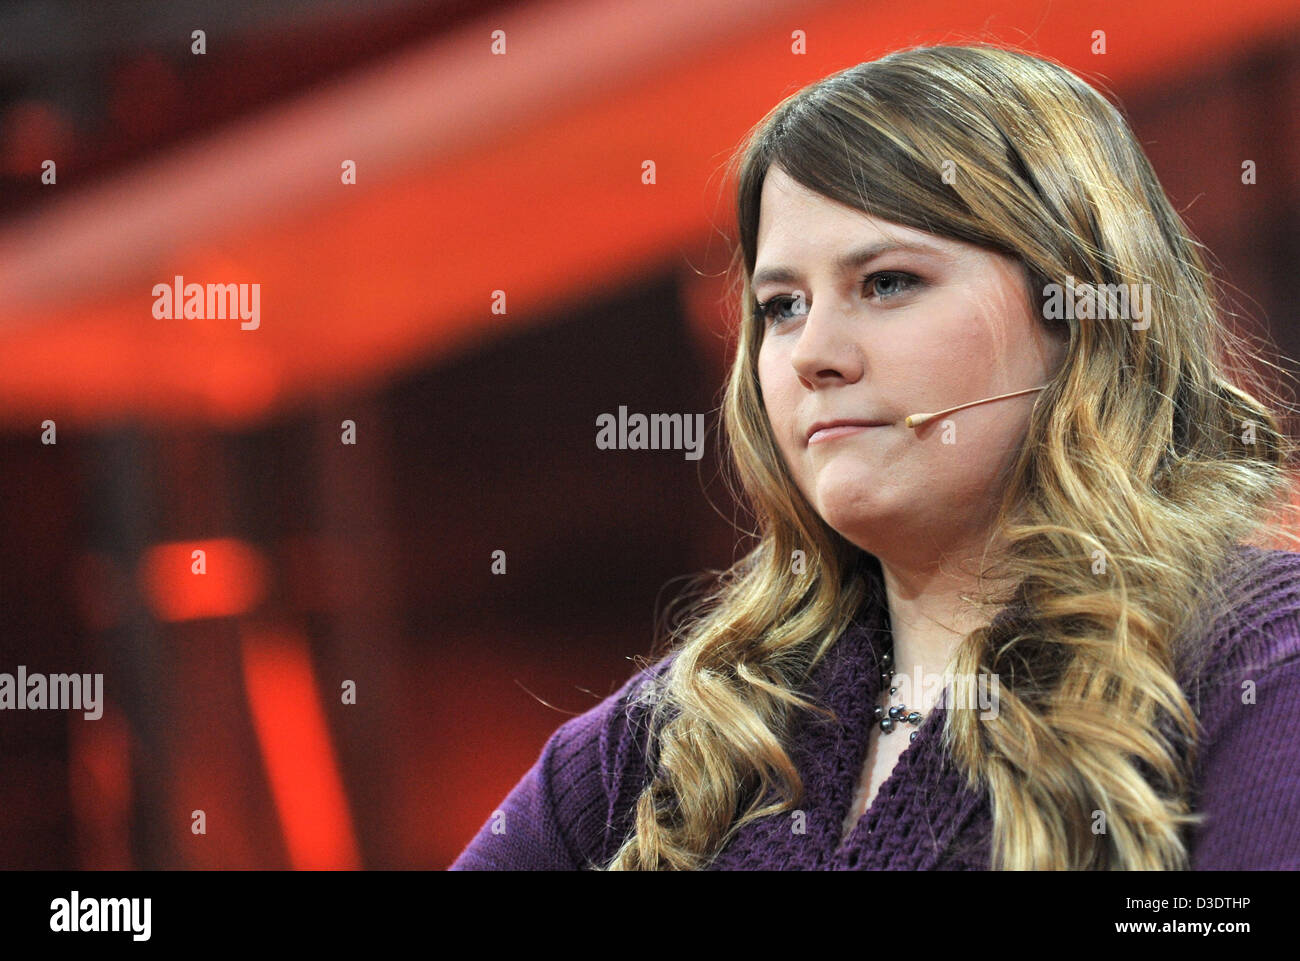 Kidnap victim Natascha Kampusch appears in the ARD television talk show 'Guenther Jauch' at Gasometer in Berlin, Germany, 17 February 2013. This week's topic is 'Kidnapped  and abused - How successful is life afterwards?'. Photo: PAUL ZINKEN Stock Photo